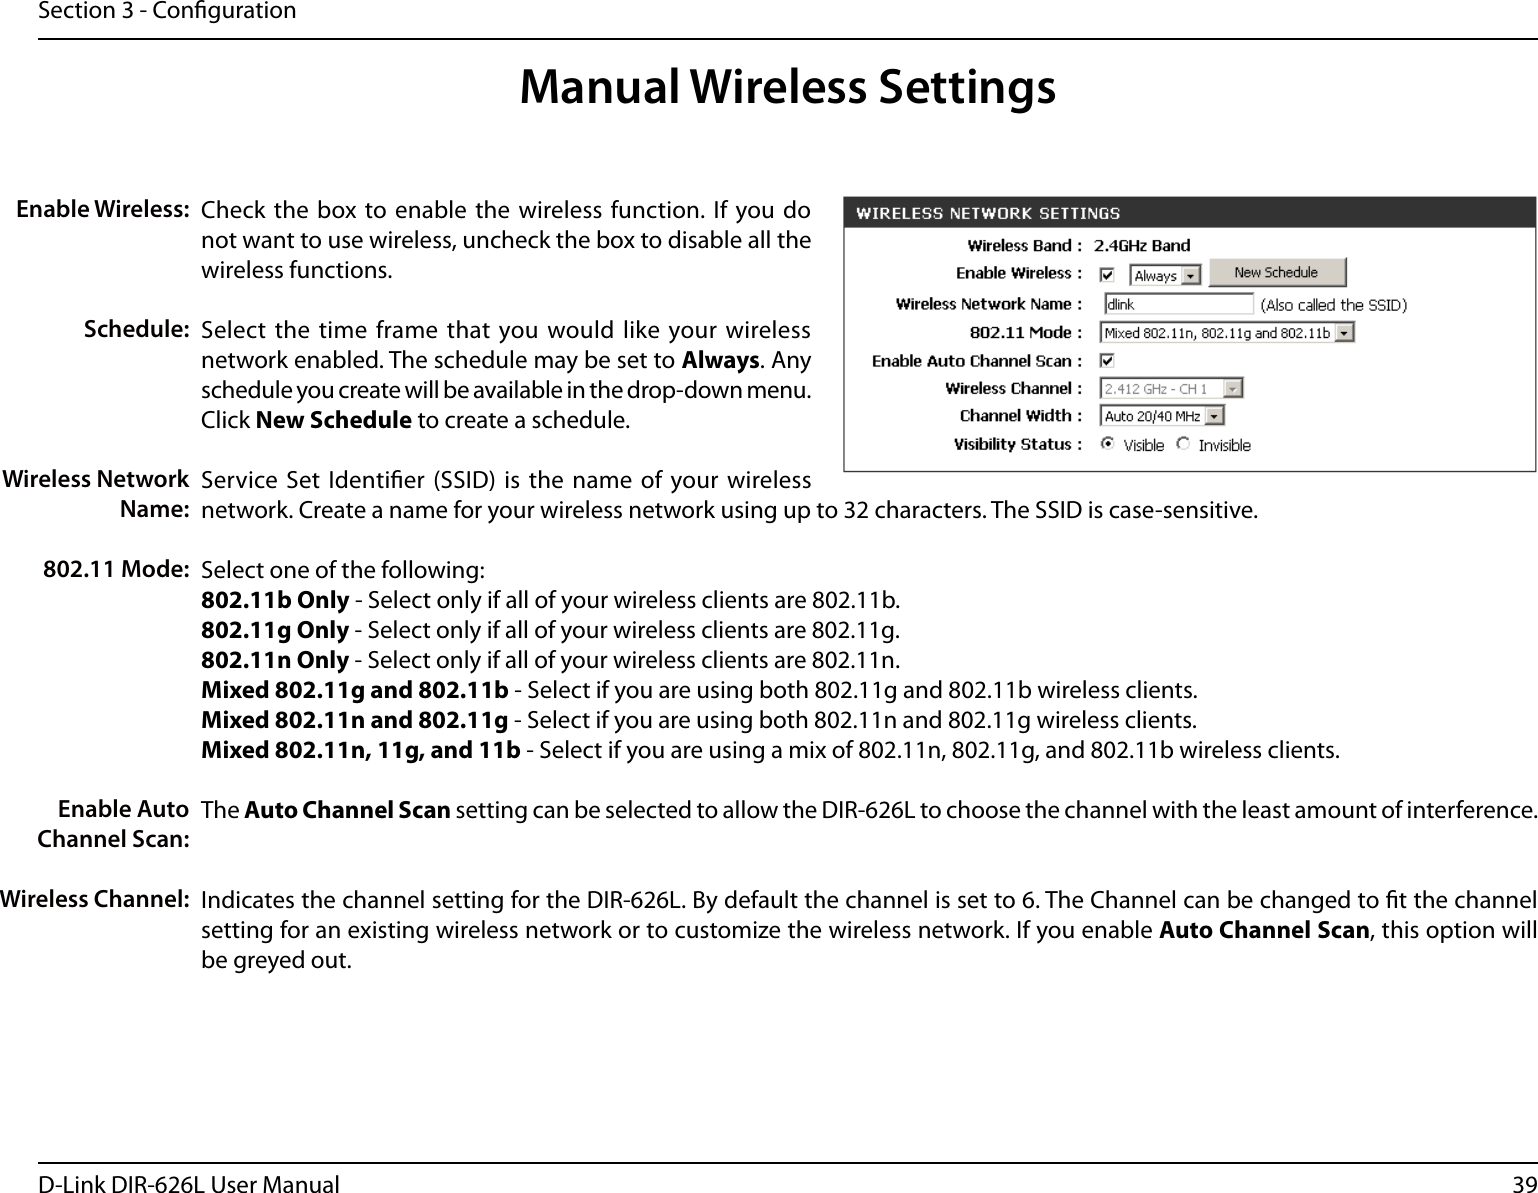 39D-Link DIR-626L User ManualSection 3 - CongurationCheck the  box to enable the wireless function. If  you do not want to use wireless, uncheck the box to disable all the wireless functions.Select  the time frame that you would like your wireless network enabled. The schedule may be set to Always. Any schedule you create will be available in the drop-down menu. Click New Schedule to create a schedule.Service Set Identier (SSID) is the name of your wireless network. Create a name for your wireless network using up to 32 characters. The SSID is case-sensitive.Select one of the following:802.11b Only - Select only if all of your wireless clients are 802.11b.802.11g Only - Select only if all of your wireless clients are 802.11g.802.11n Only - Select only if all of your wireless clients are 802.11n.Mixed 802.11g and 802.11b - Select if you are using both 802.11g and 802.11b wireless clients.Mixed 802.11n and 802.11g - Select if you are using both 802.11n and 802.11g wireless clients.Mixed 802.11n, 11g, and 11b - Select if you are using a mix of 802.11n, 802.11g, and 802.11b wireless clients.The Auto Channel Scan setting can be selected to allow the DIR-626L to choose the channel with the least amount of interference.Indicates the channel setting for the DIR-626L. By default the channel is set to 6. The Channel can be changed to t the channel setting for an existing wireless network or to customize the wireless network. If you enable Auto Channel Scan, this option will be greyed out.Enable Wireless:Schedule:Wireless Network Name:802.11 Mode:Enable Auto Channel Scan:Wireless Channel:Manual Wireless Settings